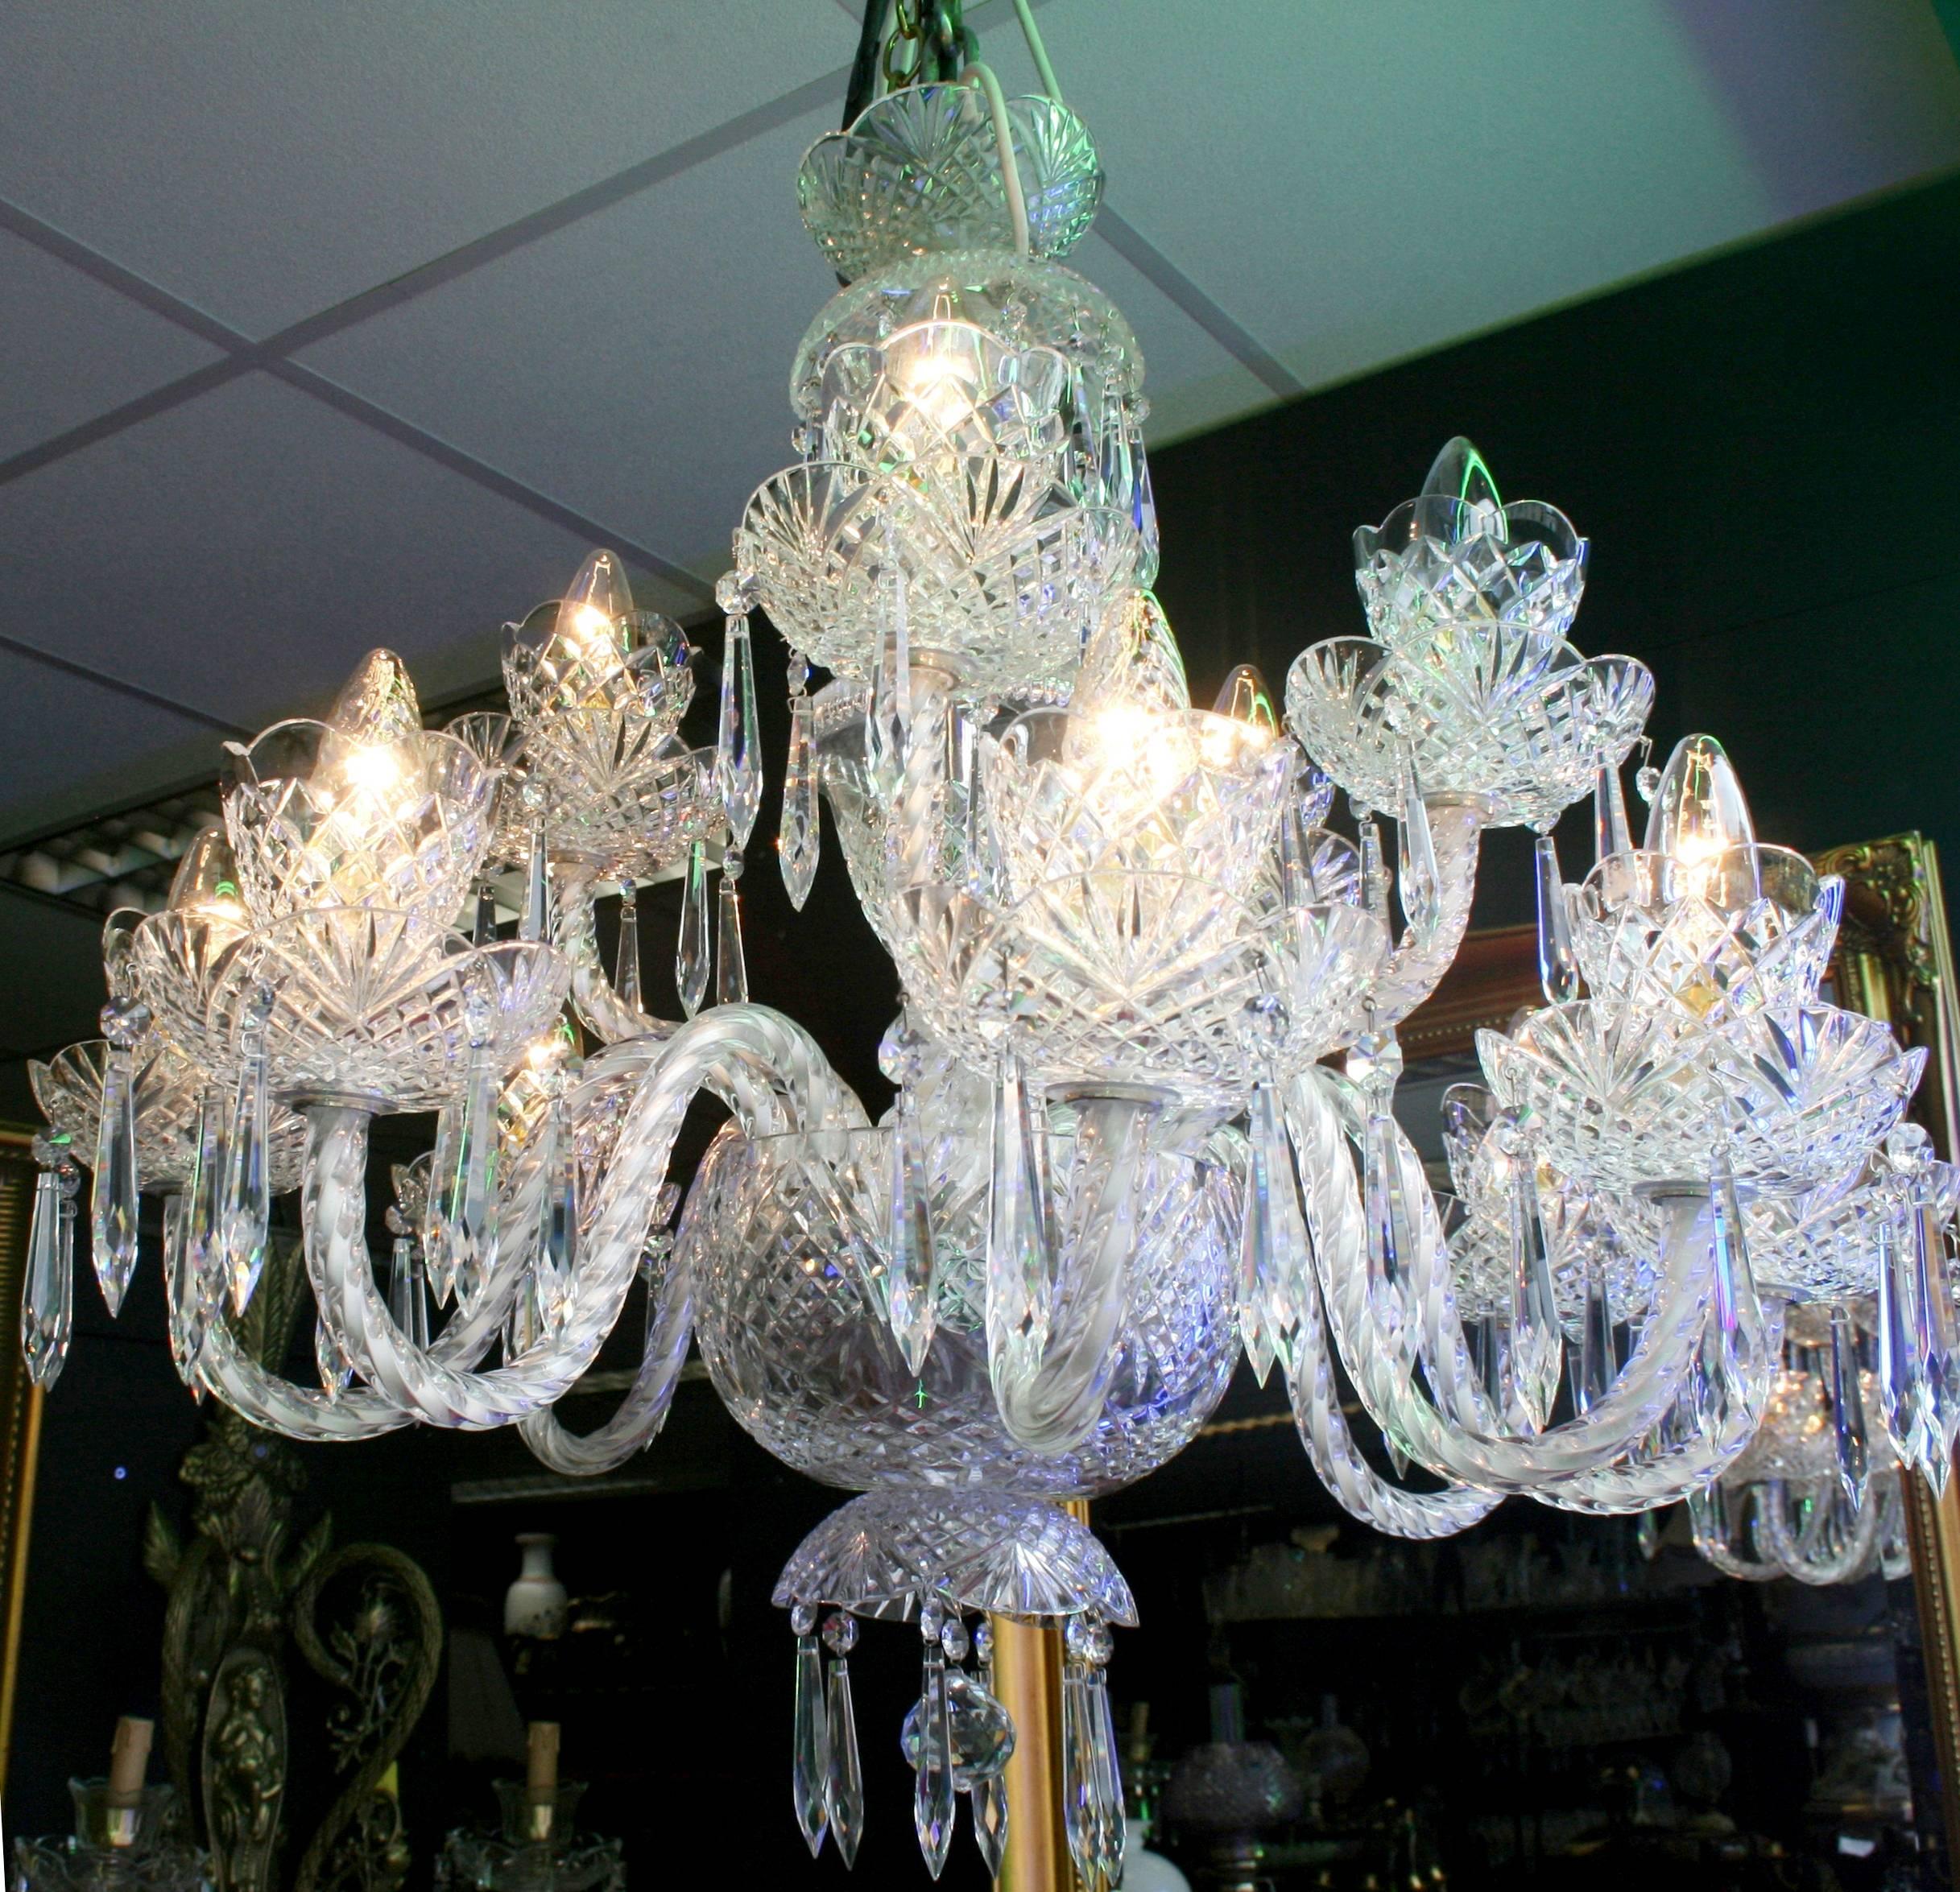 Crystal cut-glass Irish crystal
Arms 12
Tiers two
Measures: Width 71 cm / 28 in
Drop 69 cm / 27 in
Light fitting SBC
Condition excellent condition. Crystal stamped Waterford crystal. Ready to hang.




Offered for dale a very fine quality